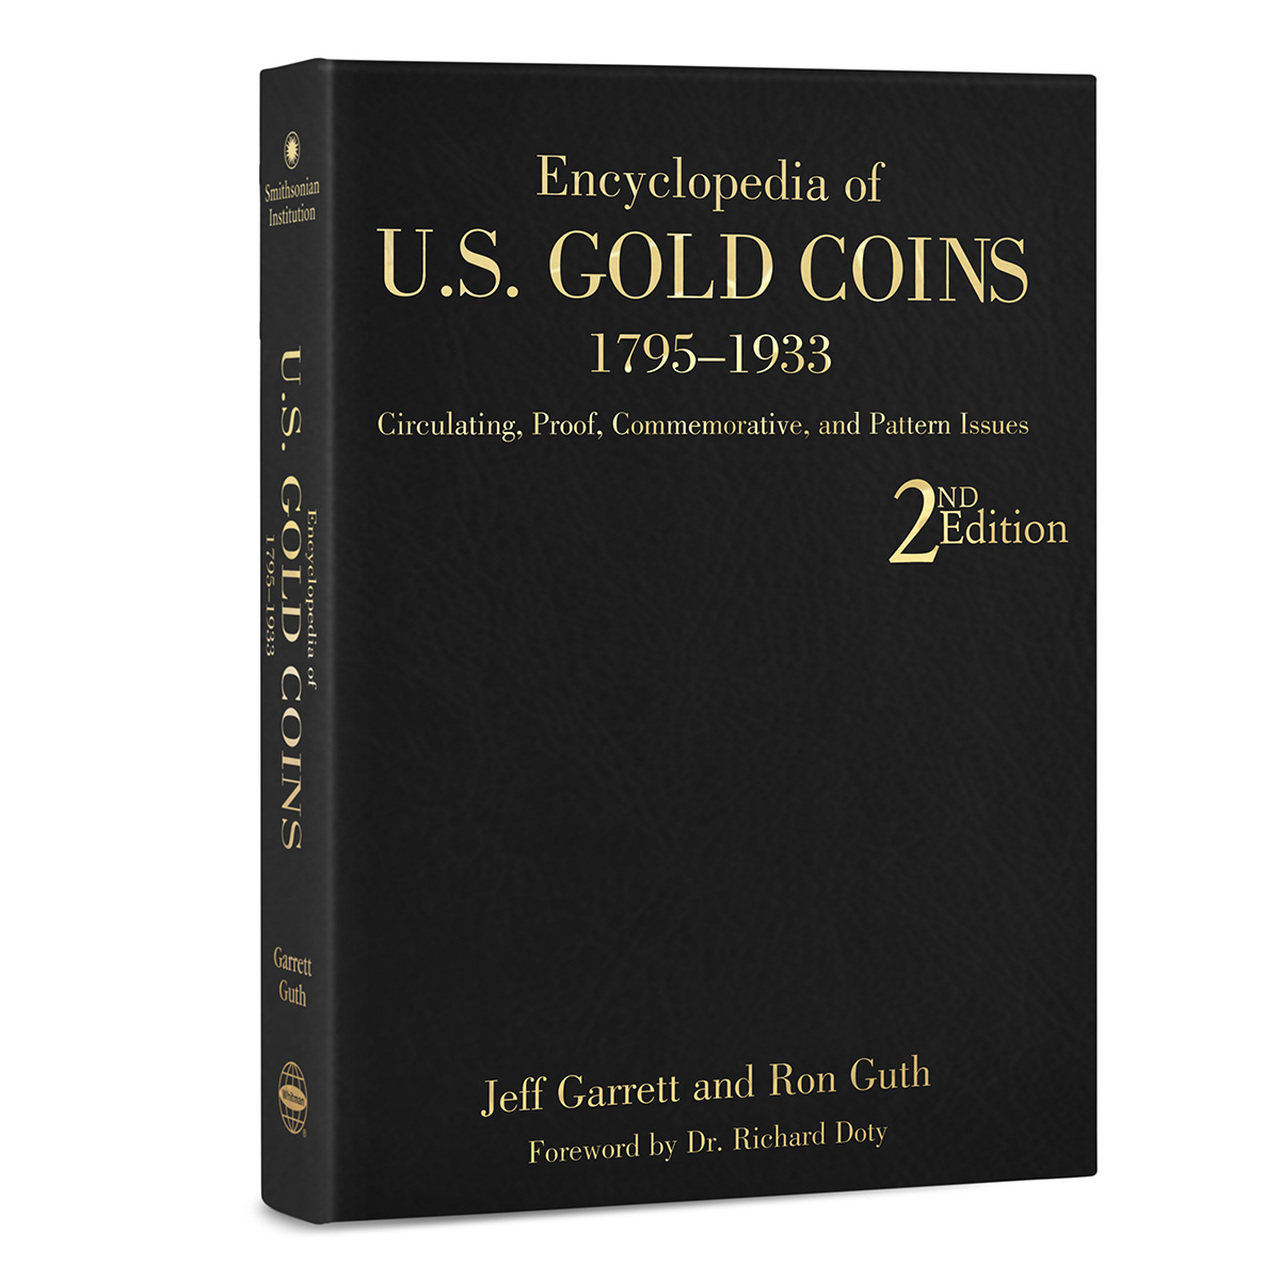 Encyclopedia of U.S. Gold Coins 1795-1933 - 2nd Edition - Leather by Jeff Garrett and Ron Guth